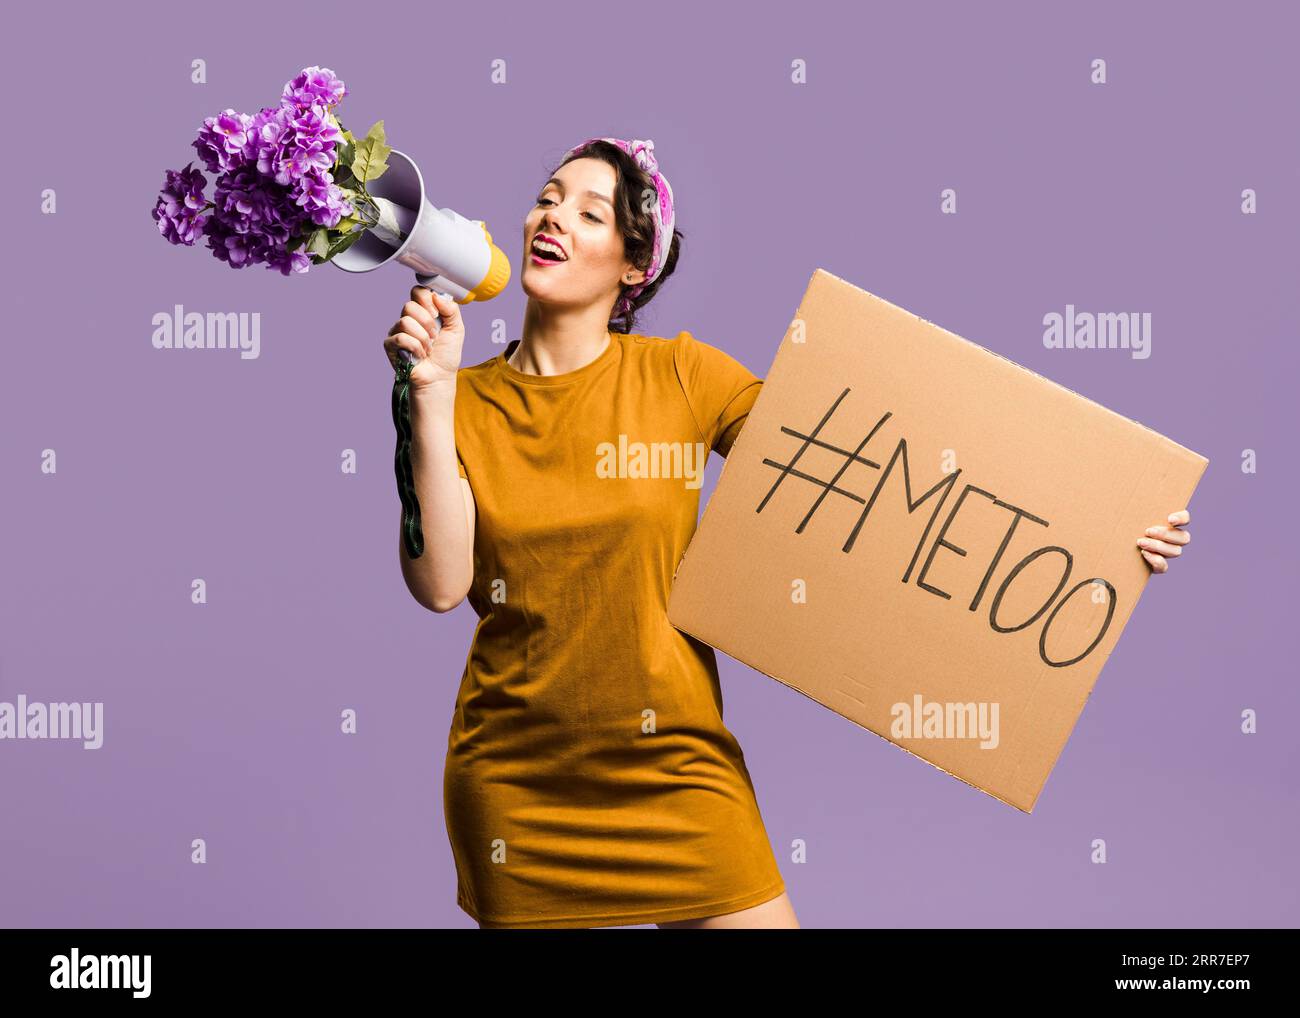 Woman talking megaphone holding cardboard with me too sign Stock Photo